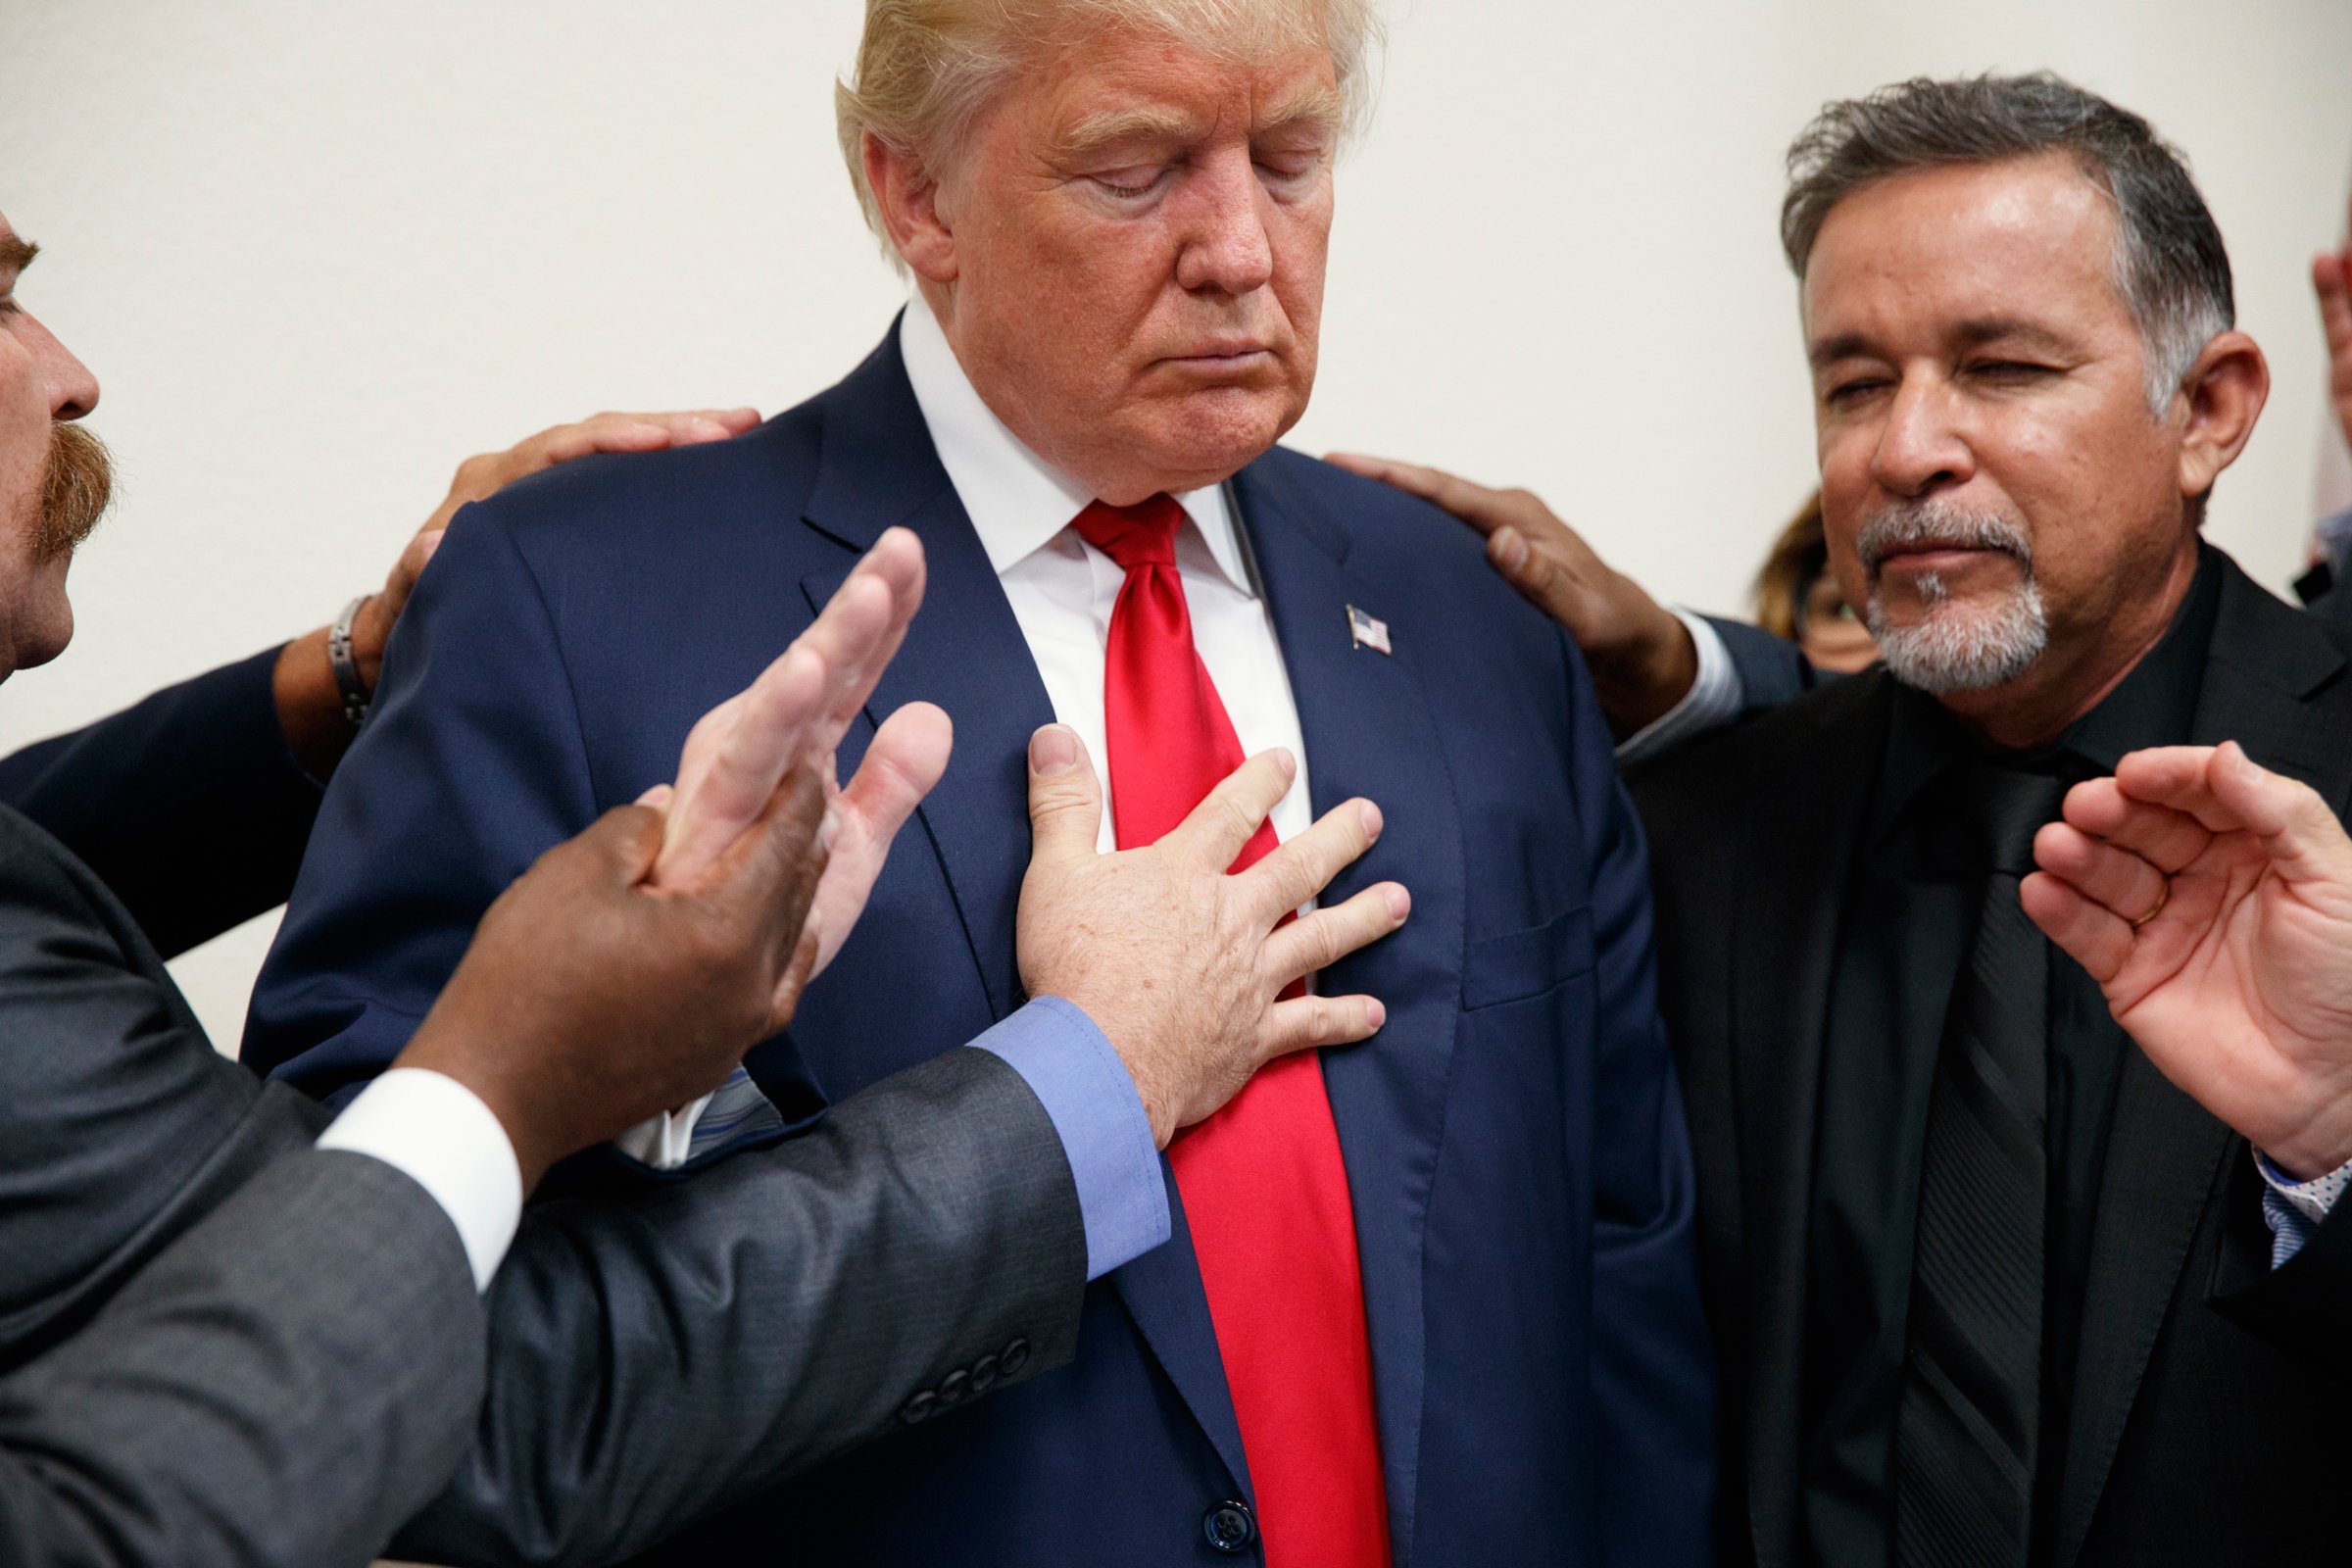 Pastors from the Las Vegas area pray with Republican presidential candidate Donald Trump during a visit to the International Church of Las Vegas, and International Christian Academy, Wednesday, Oct. 5, 2016, in Las Vegas. (AP Photo/ Evan Vucci)